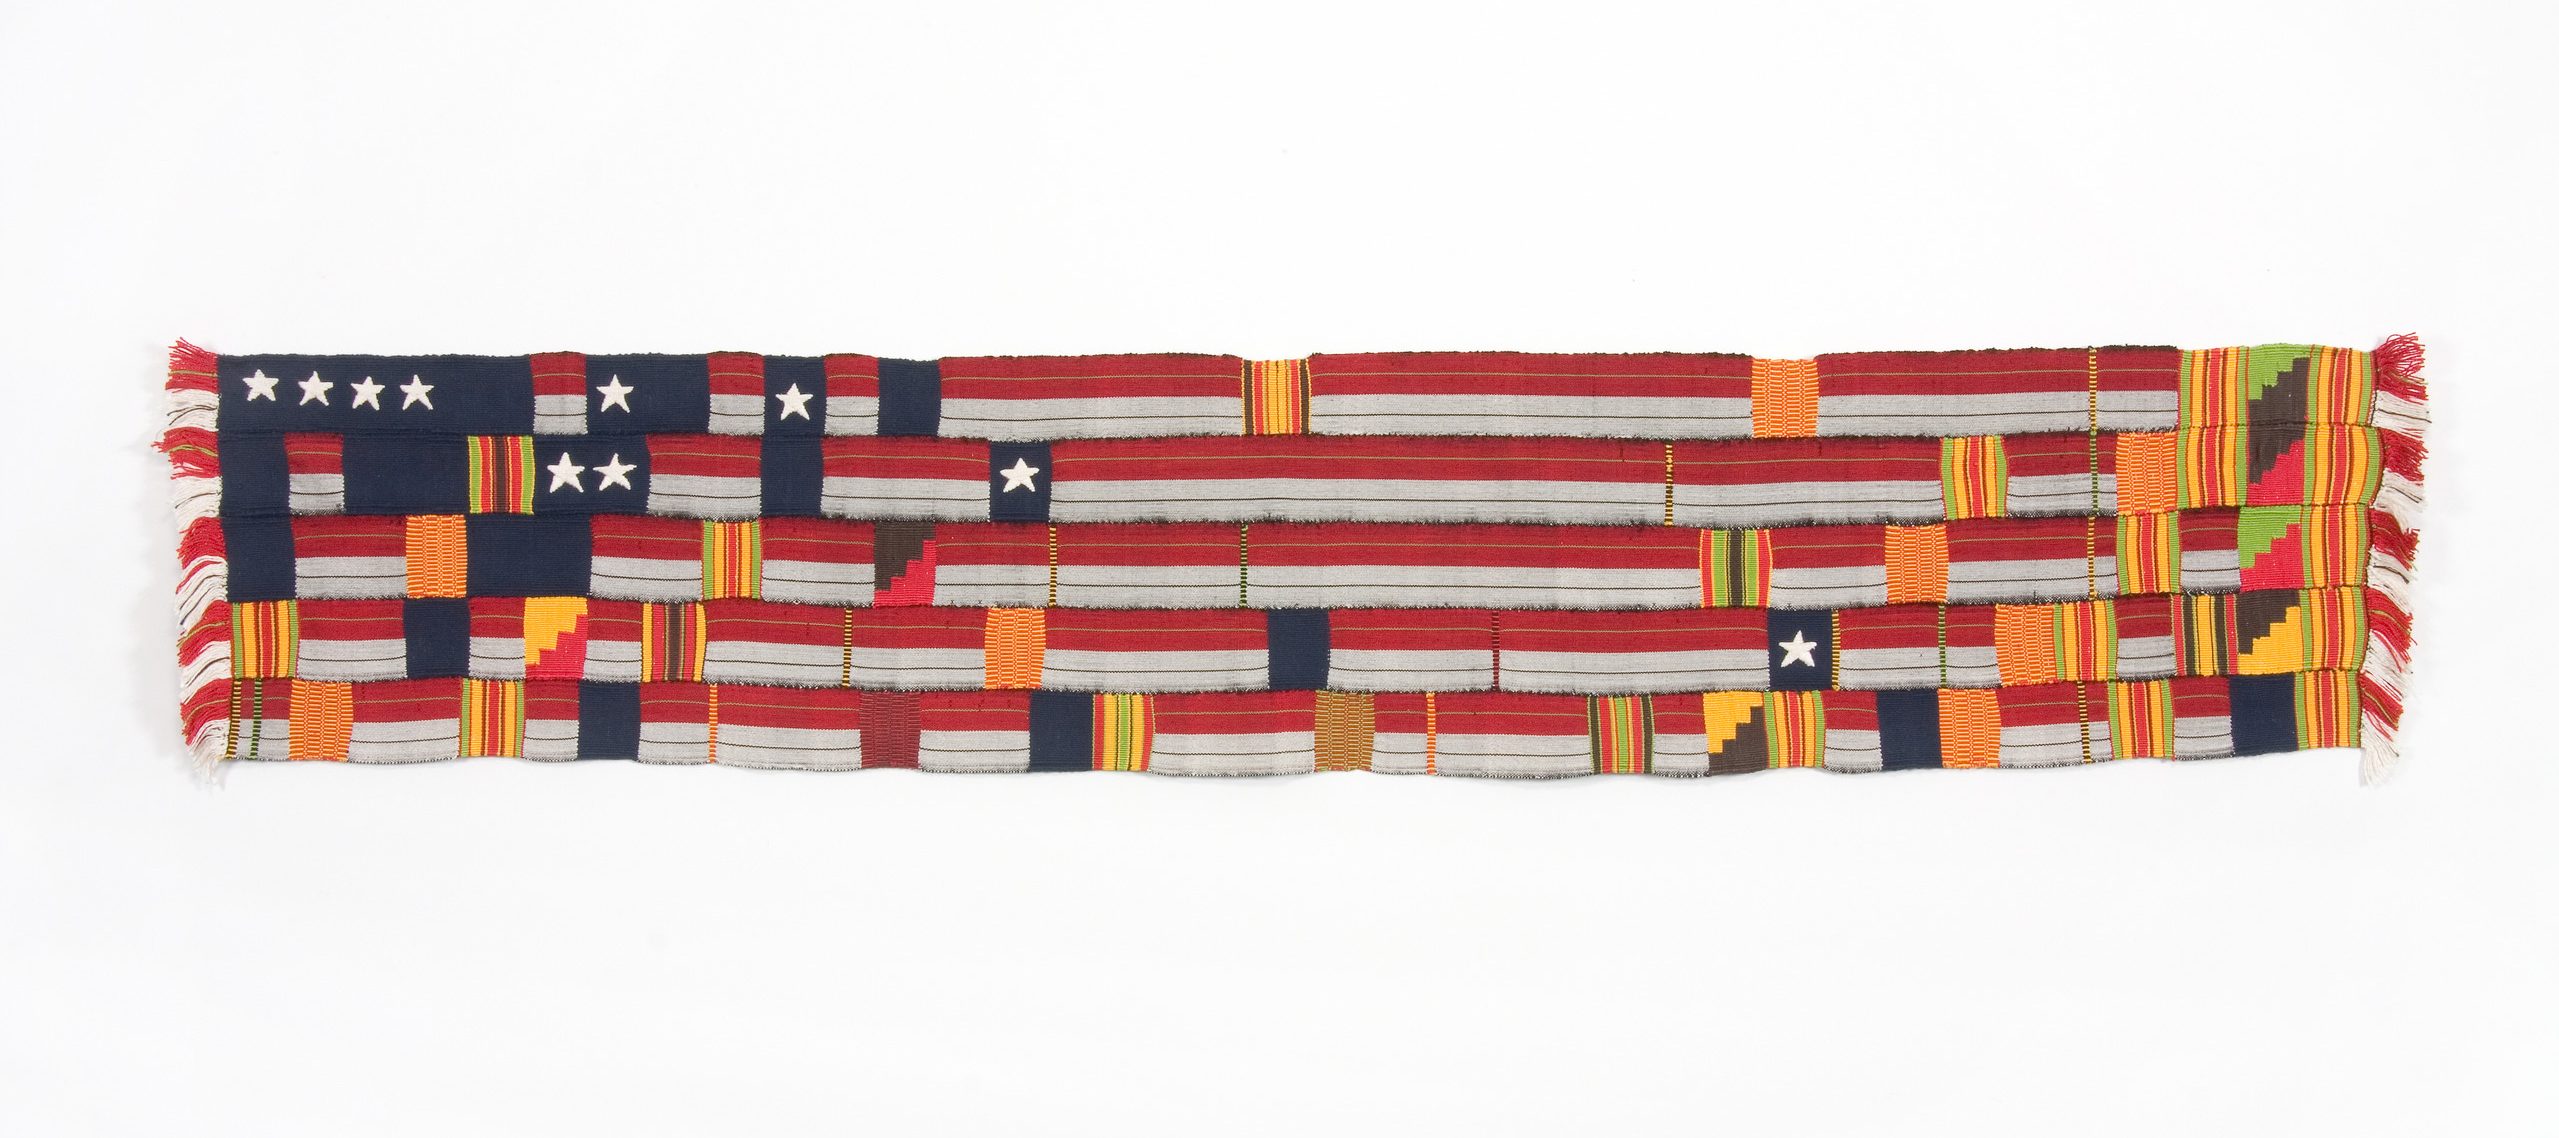 A horizontal, rectangular fabric artwork, made of woven strips of silk and cotton. The colors of the horizontal fabric strips are red, white, and blue, reminiscent of the American flag, while interwoven the vertical strips are shades of yellow, orange and green.